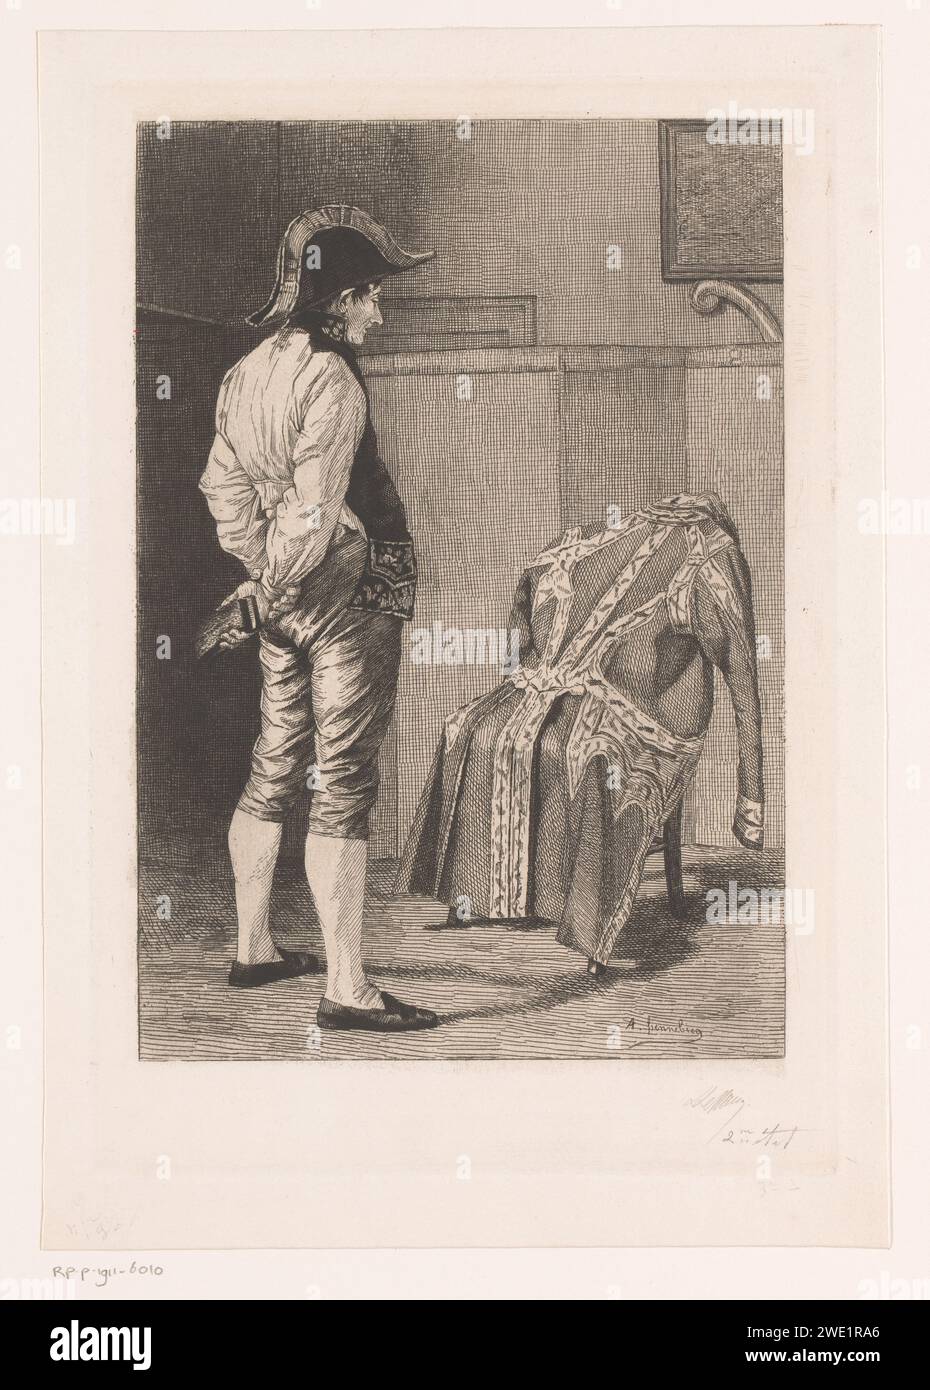 Man with clothing brush looks at his jacket hanging over a chair, Louis le nain, after André Hennebicq, 1861 - 1911 print   paper etching adult man. coat, cape. (military) uniforms. care of clothes, e.g.: brushing, beating, airing Stock Photo